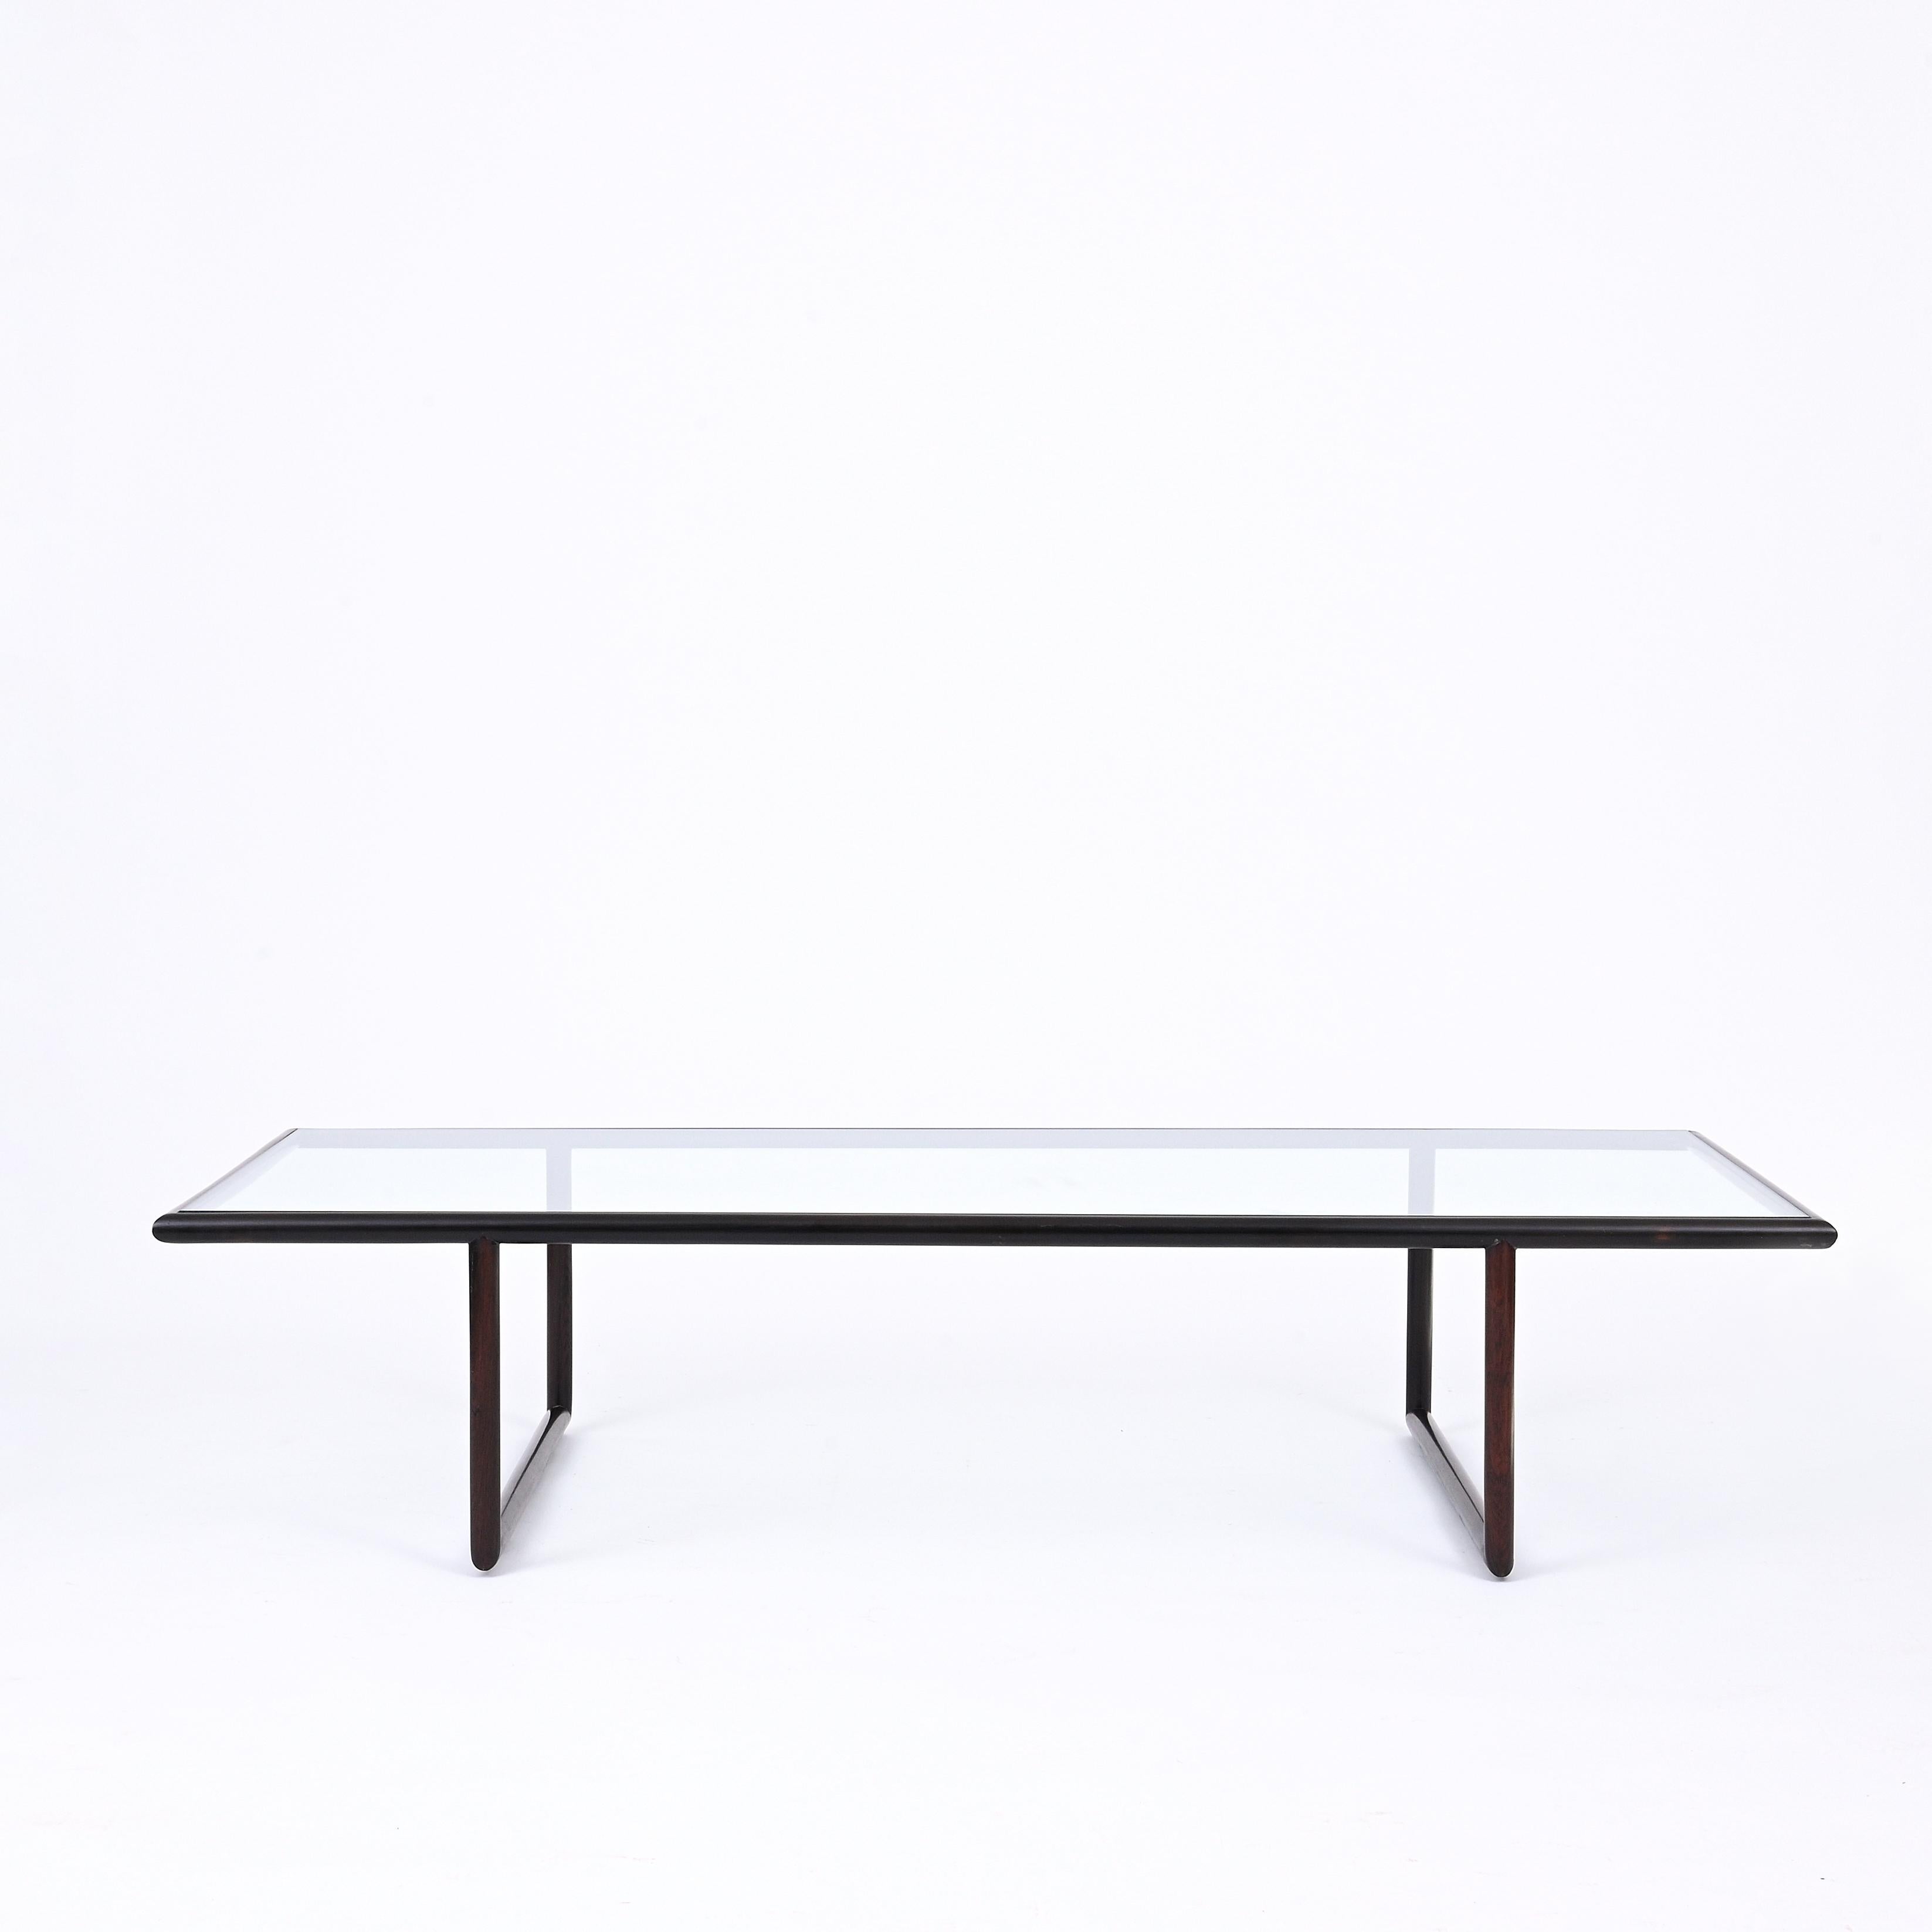 Joaquim Tenreiro's coffee table stands as a rare and unique piece within the realm of mid-20th century Brazilian furniture design. Crafted with meticulous attention to detail and imbued with a distinct artistic vision, this table showcases